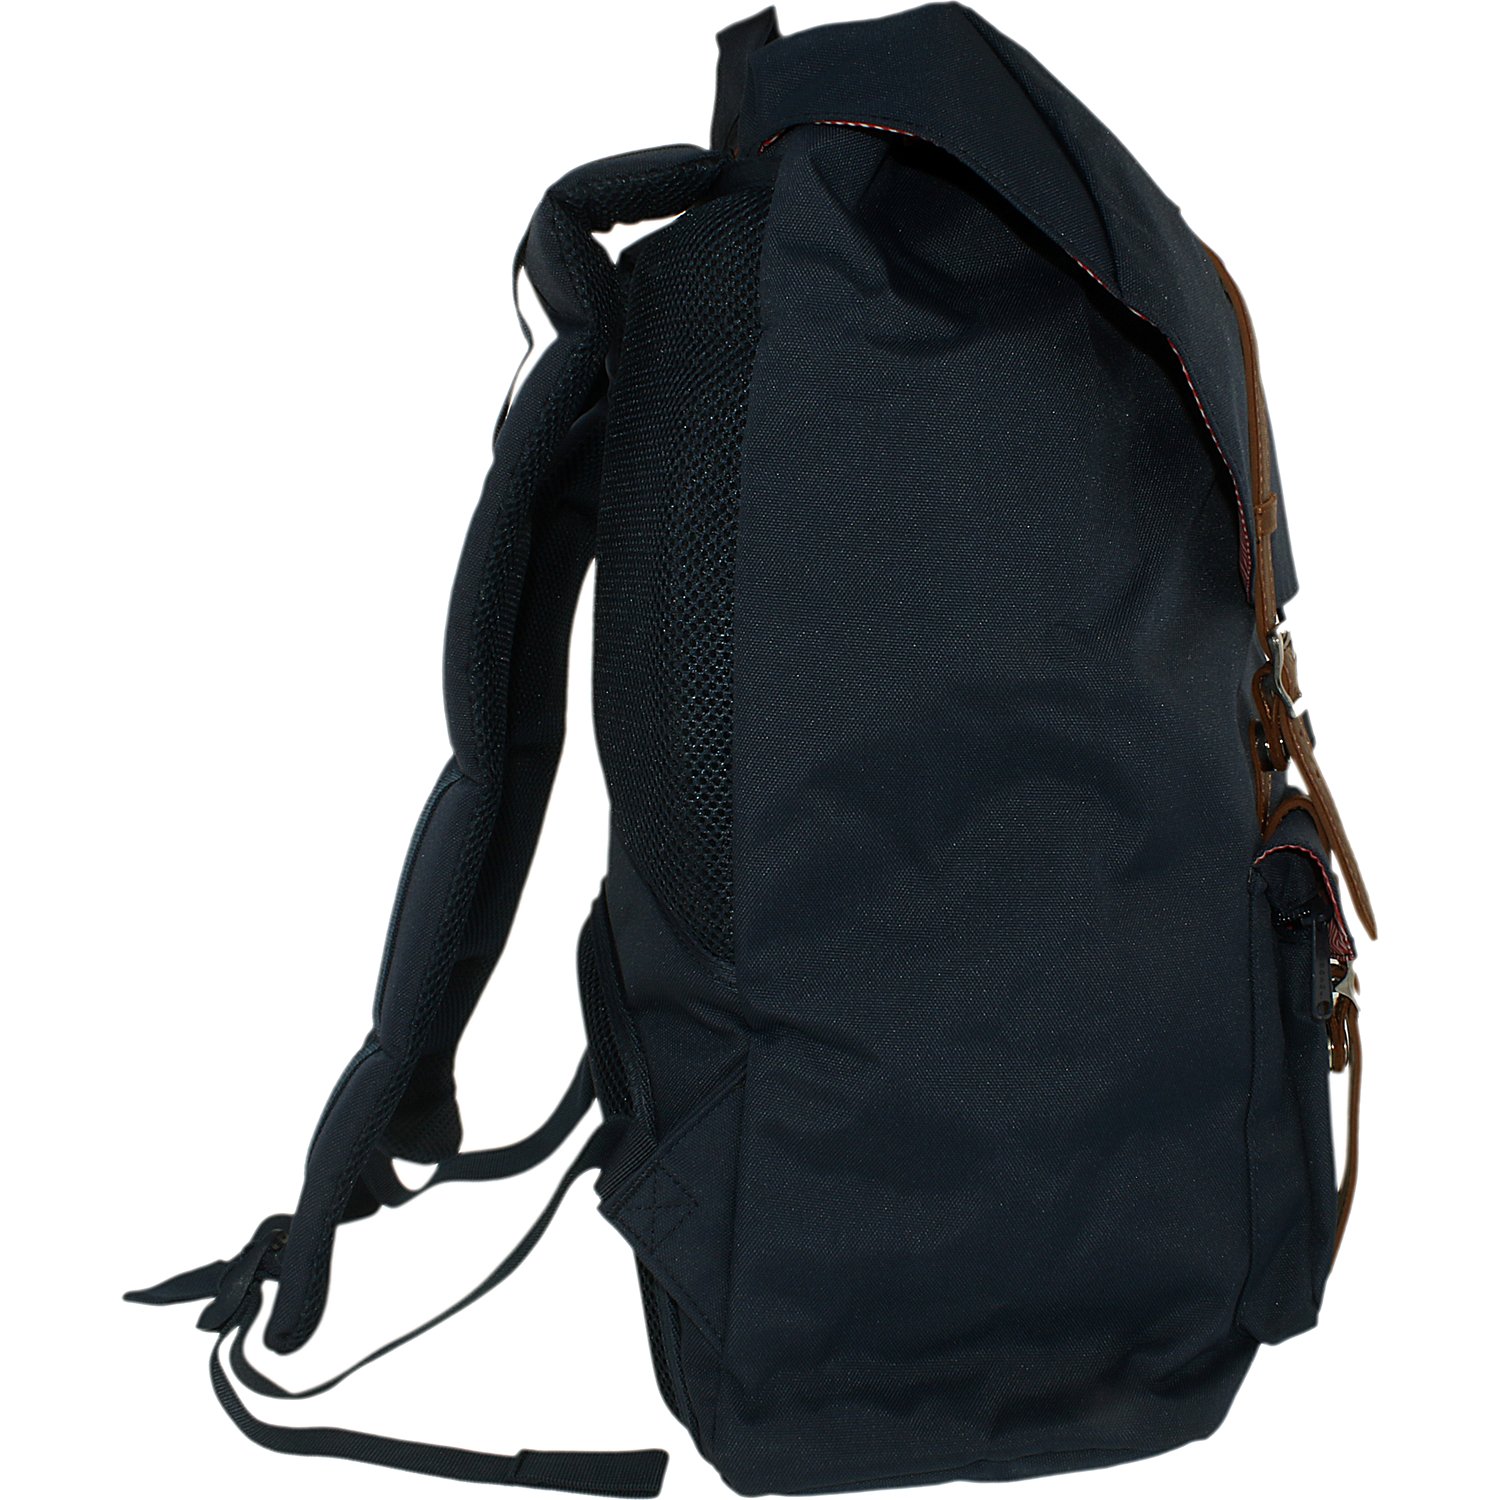 Little America Laptop Backpack - Navy - image 2 of 3